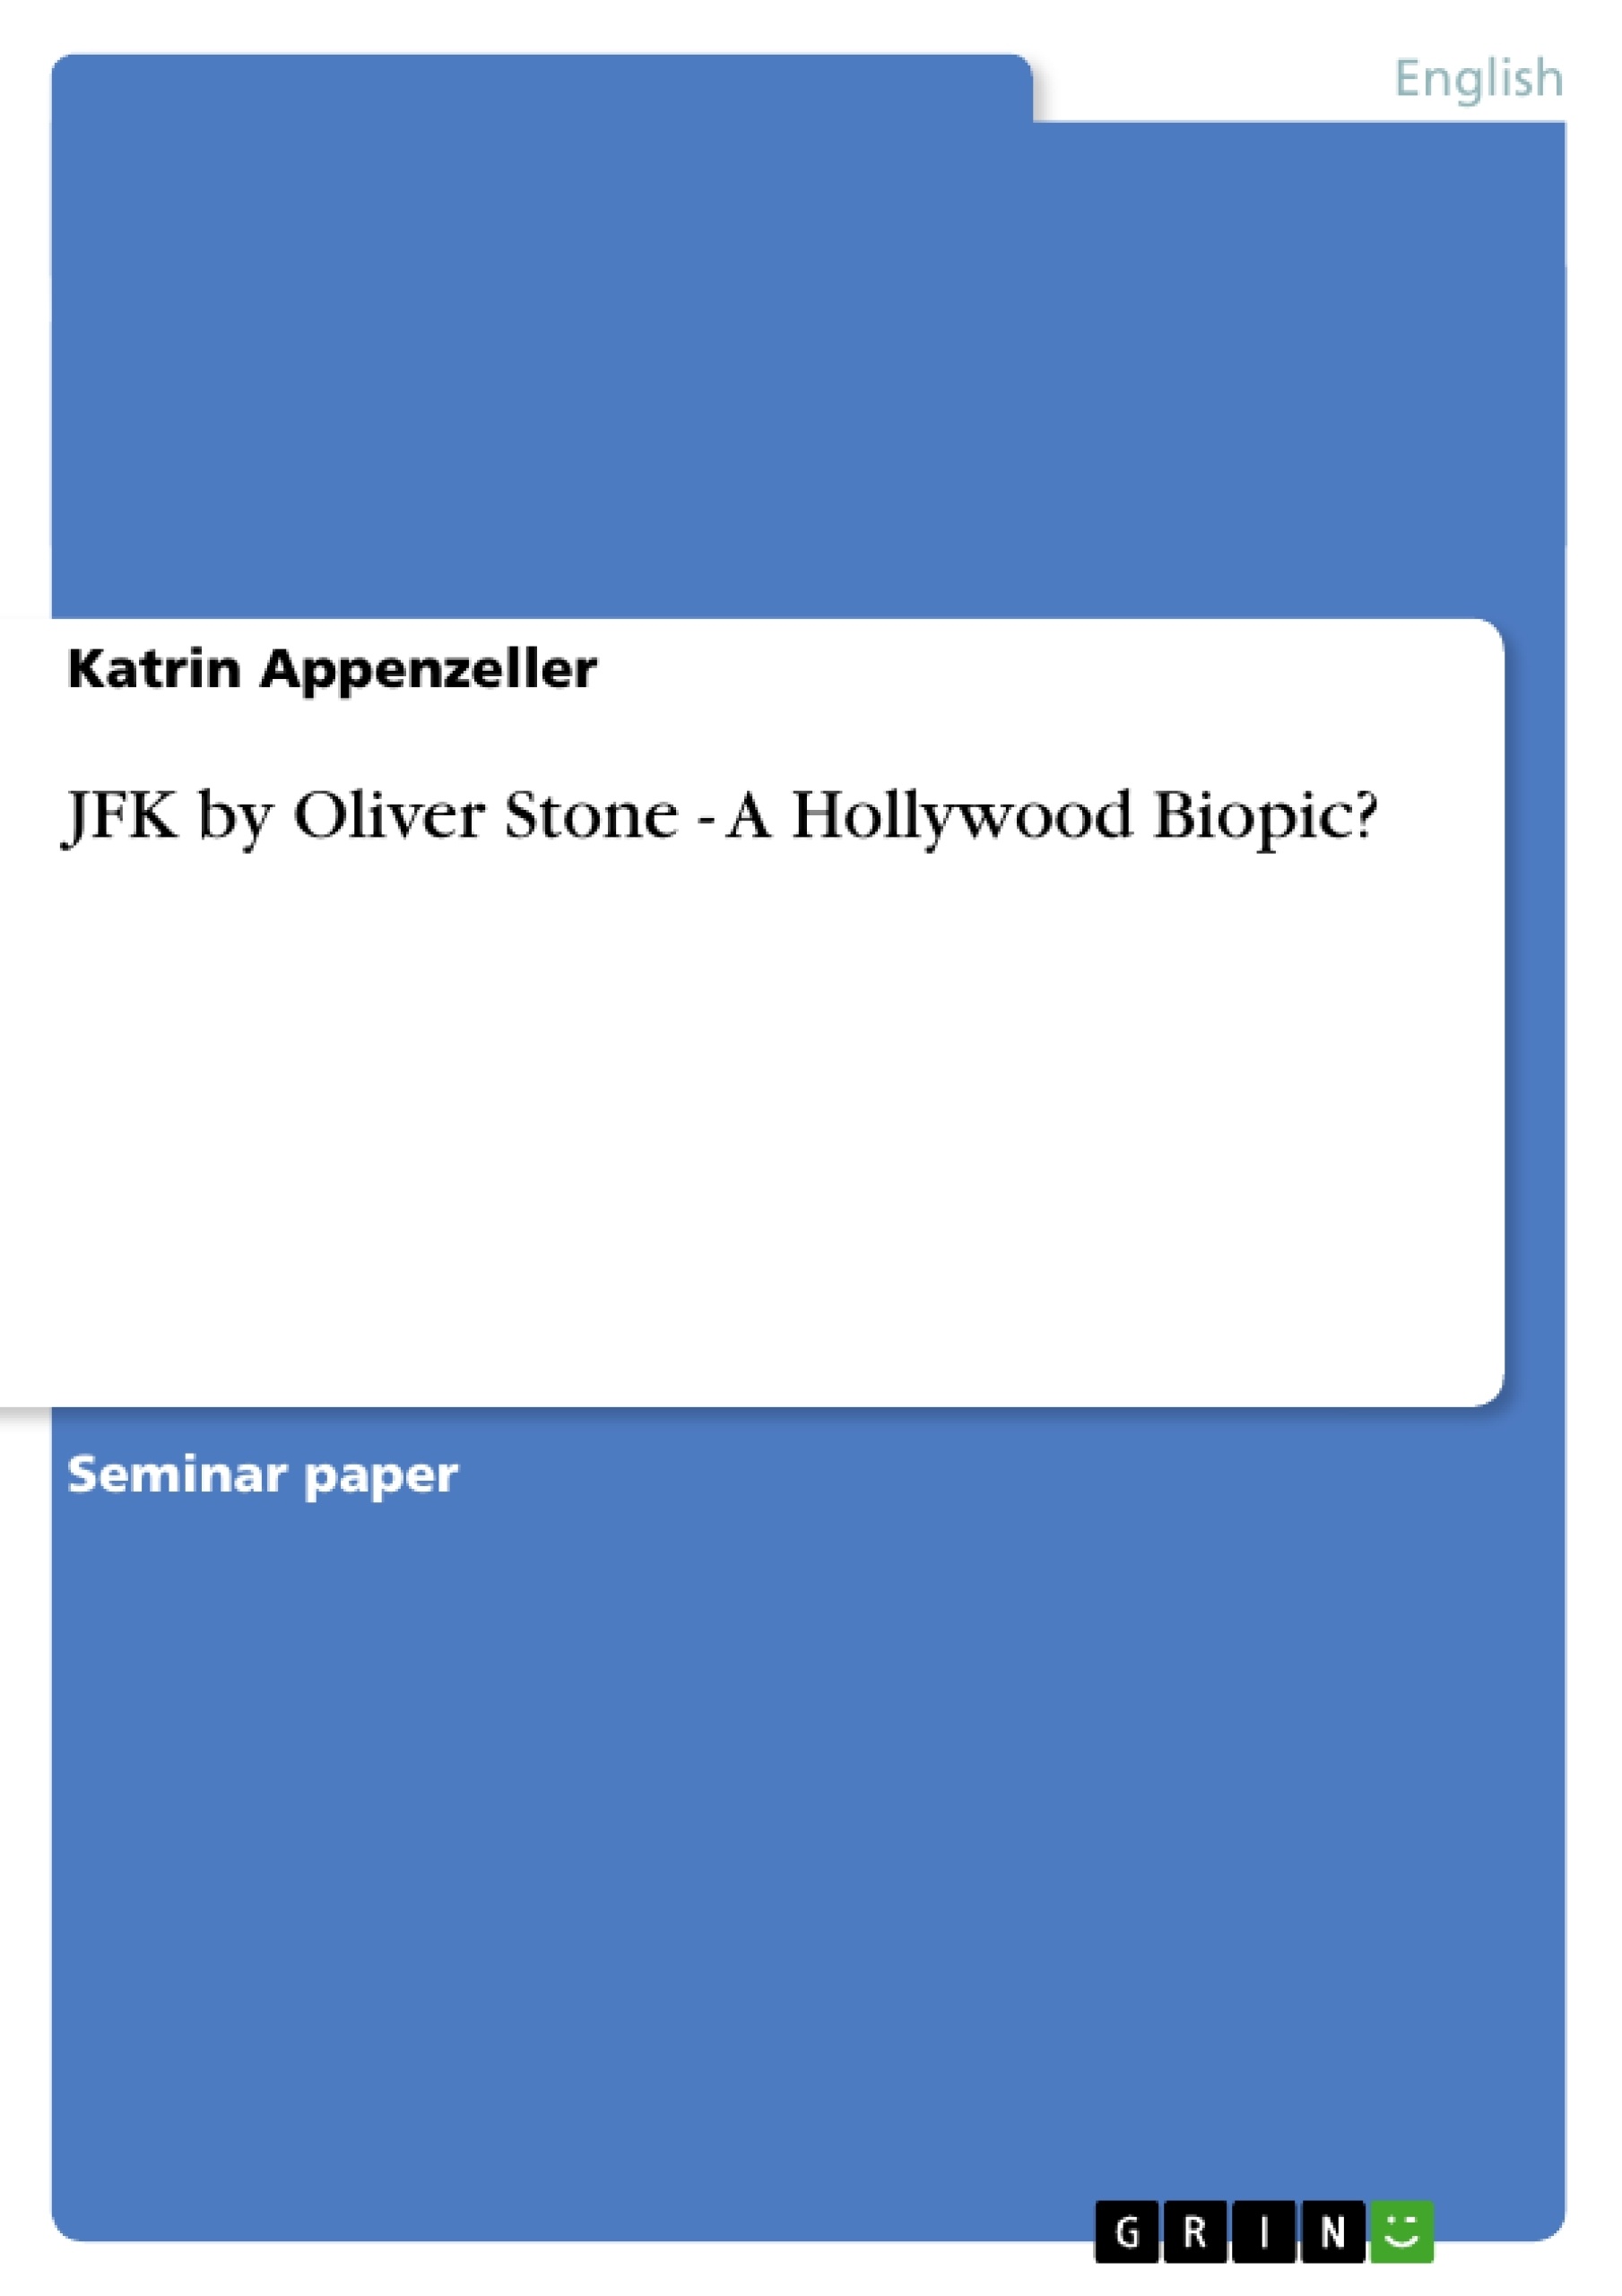 Title: JFK by Oliver Stone - A Hollywood Biopic?